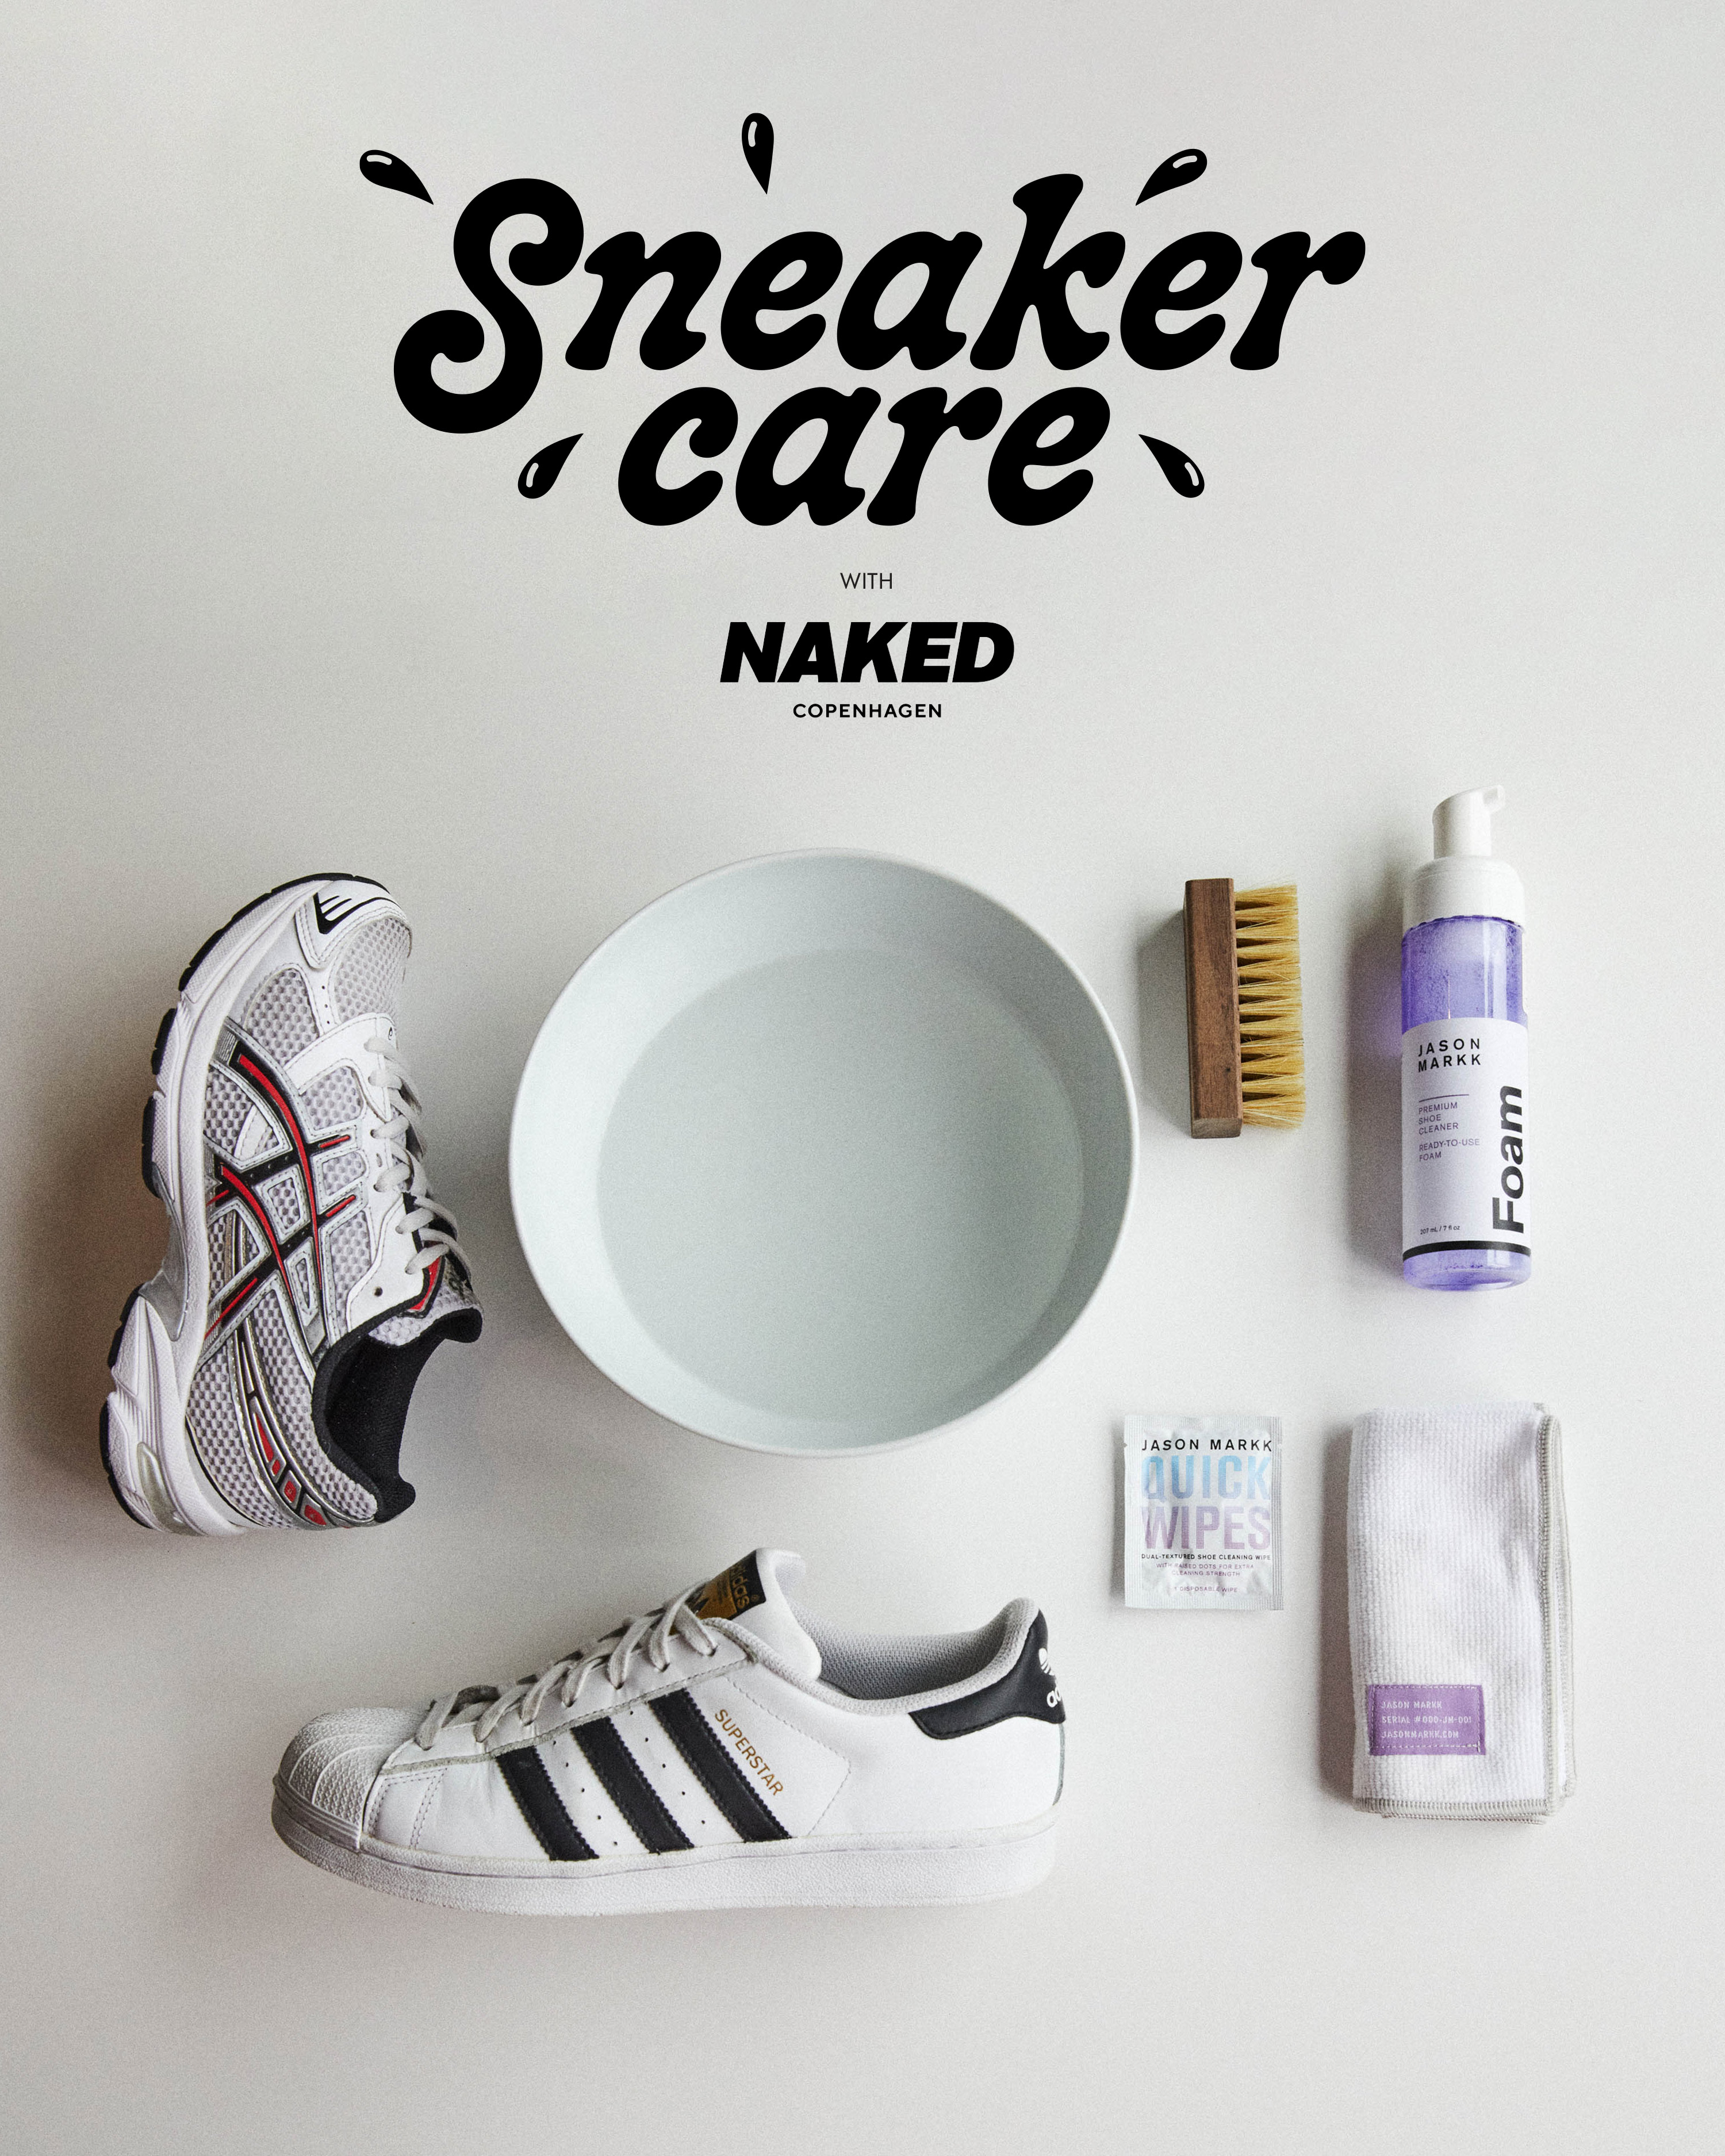 How to protect your grails: the ultimate sneaker cleaning guide - Community